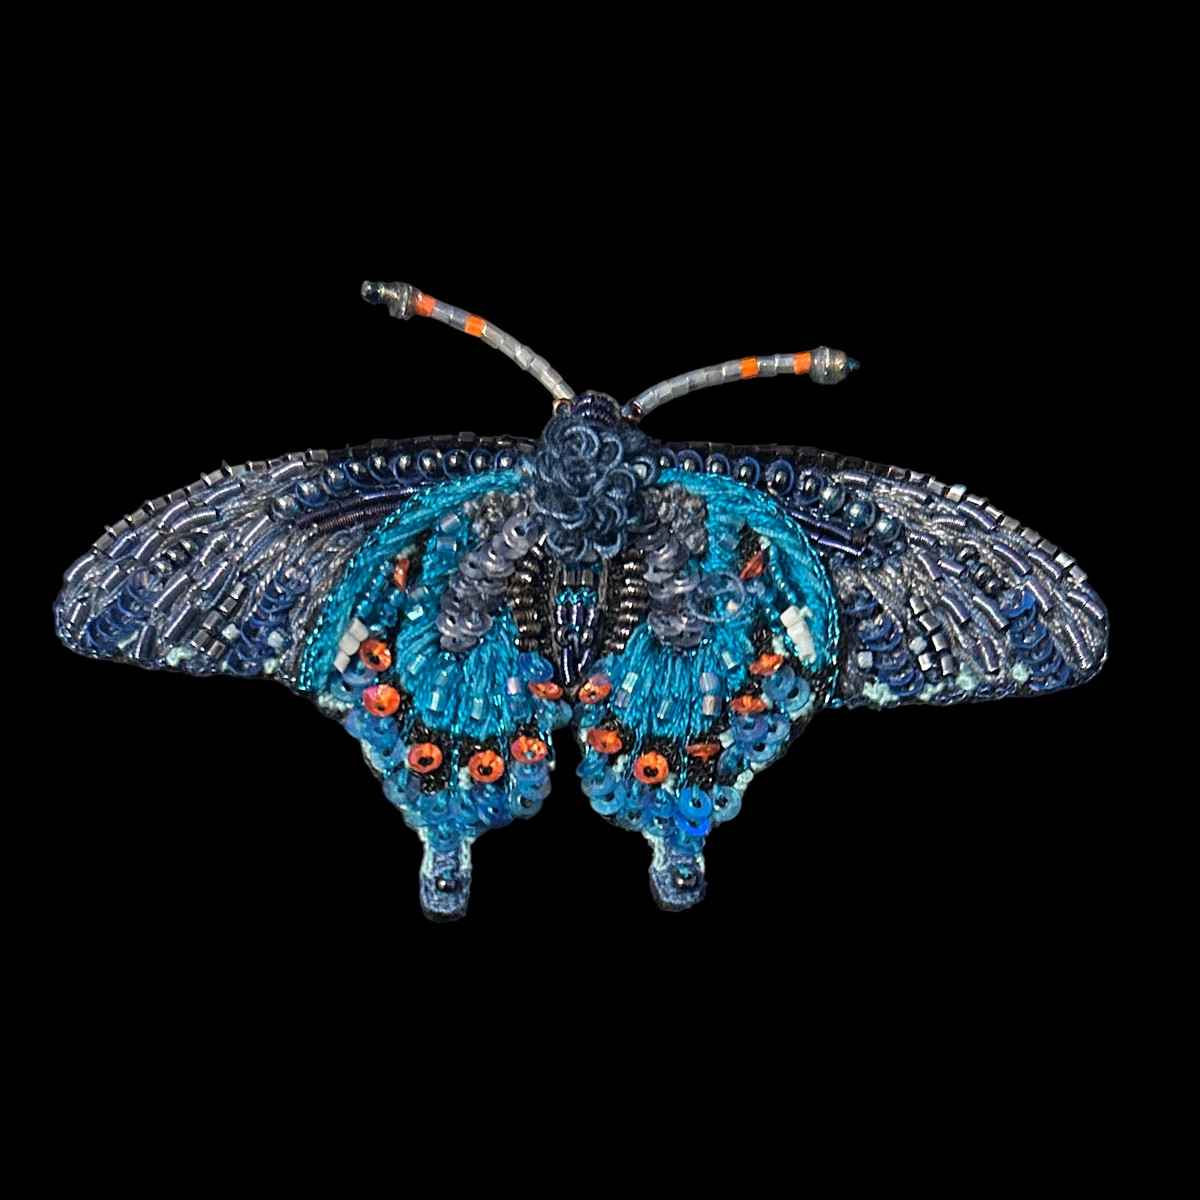 Handmade Embroidered Beaded Pipevine Swallowtail Butterfly Brooch India 